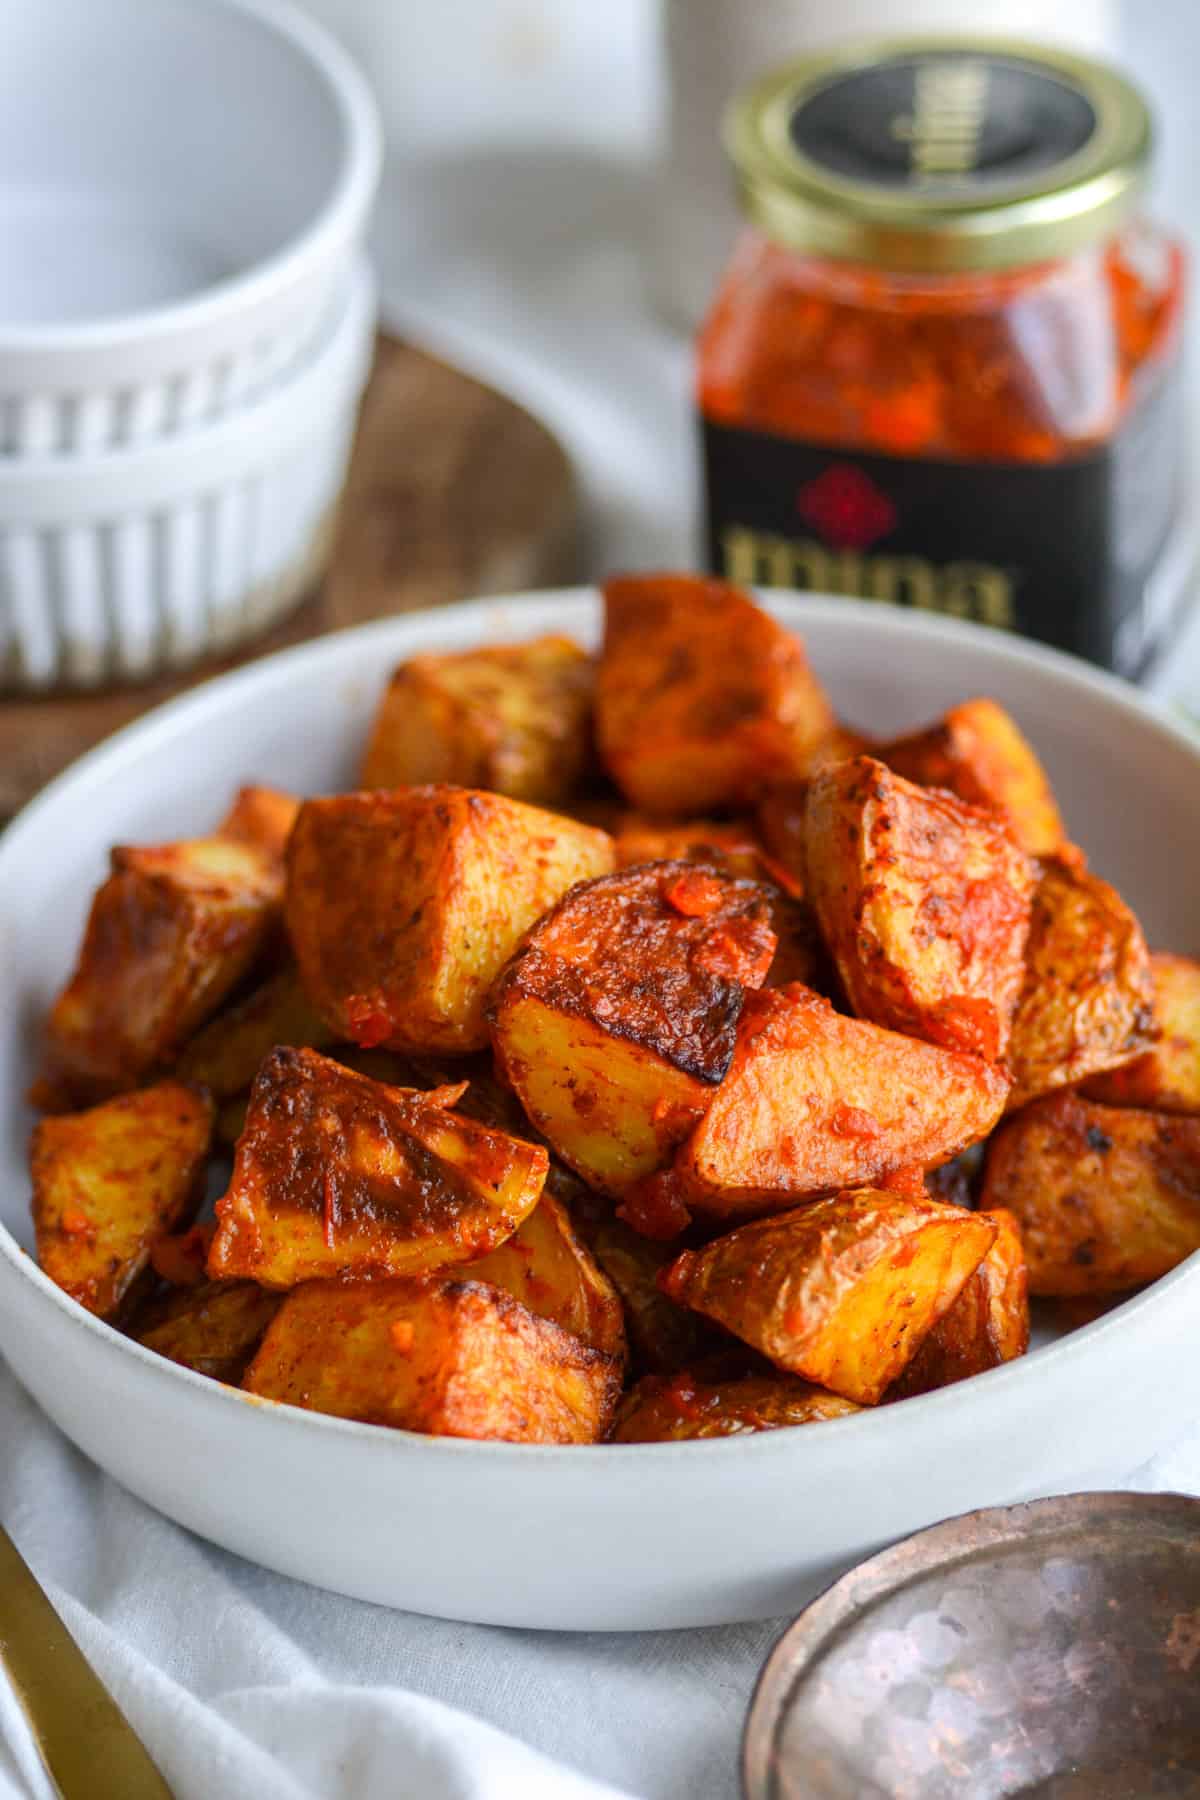 Vegan Spicy Harissa Roasted Potatoes in a shallow bowl with a jar of harissa in the background.